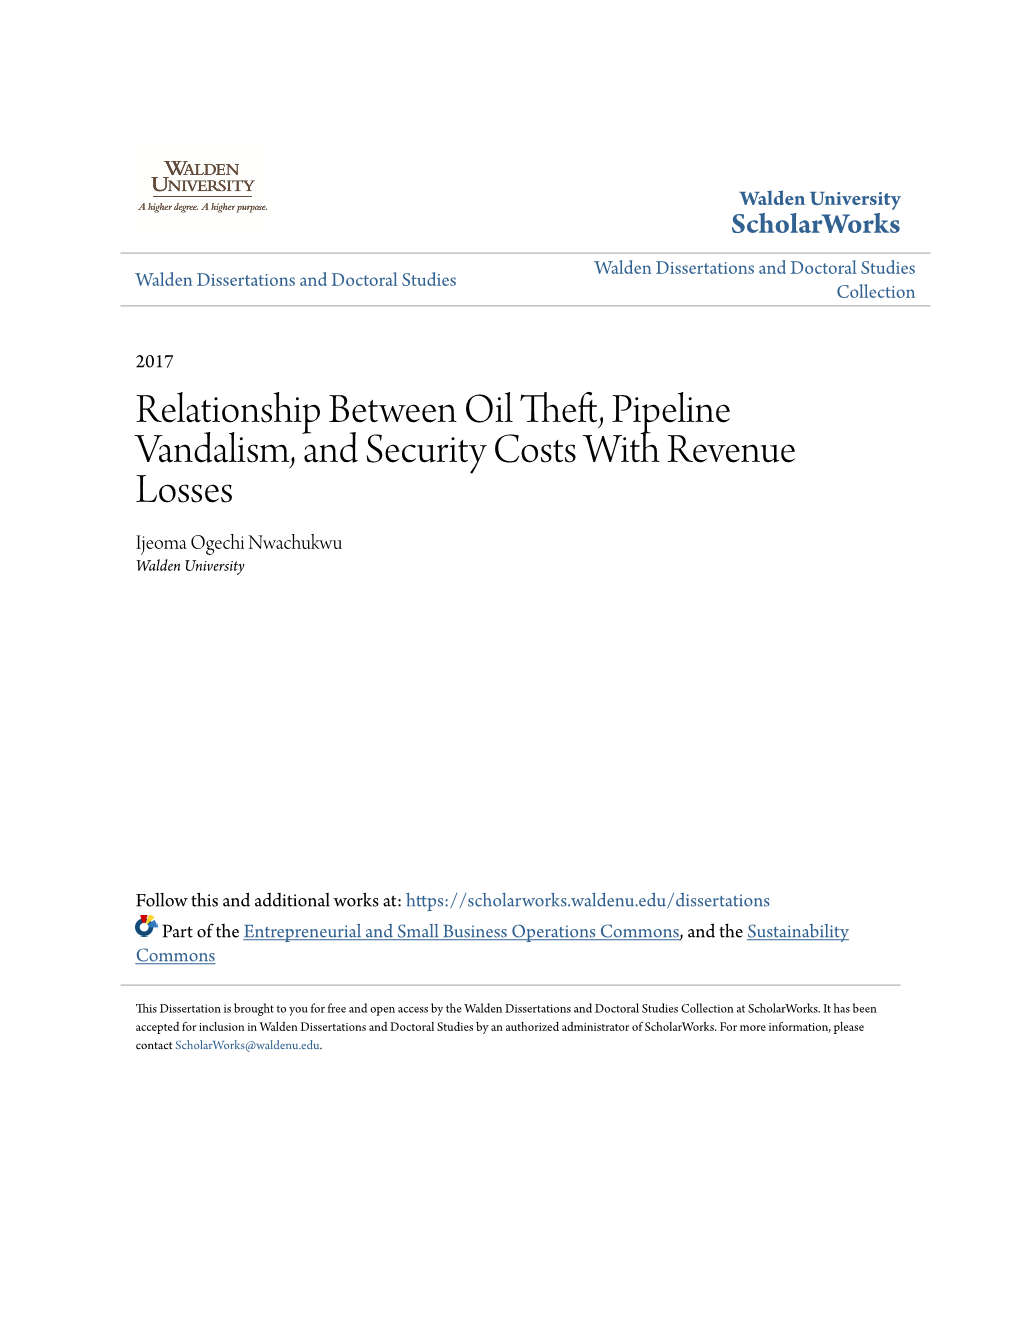 Relationship Between Oil Theft, Pipeline Vandalism, and Security Costs with Revenue Losses Ijeoma Ogechi Nwachukwu Walden University